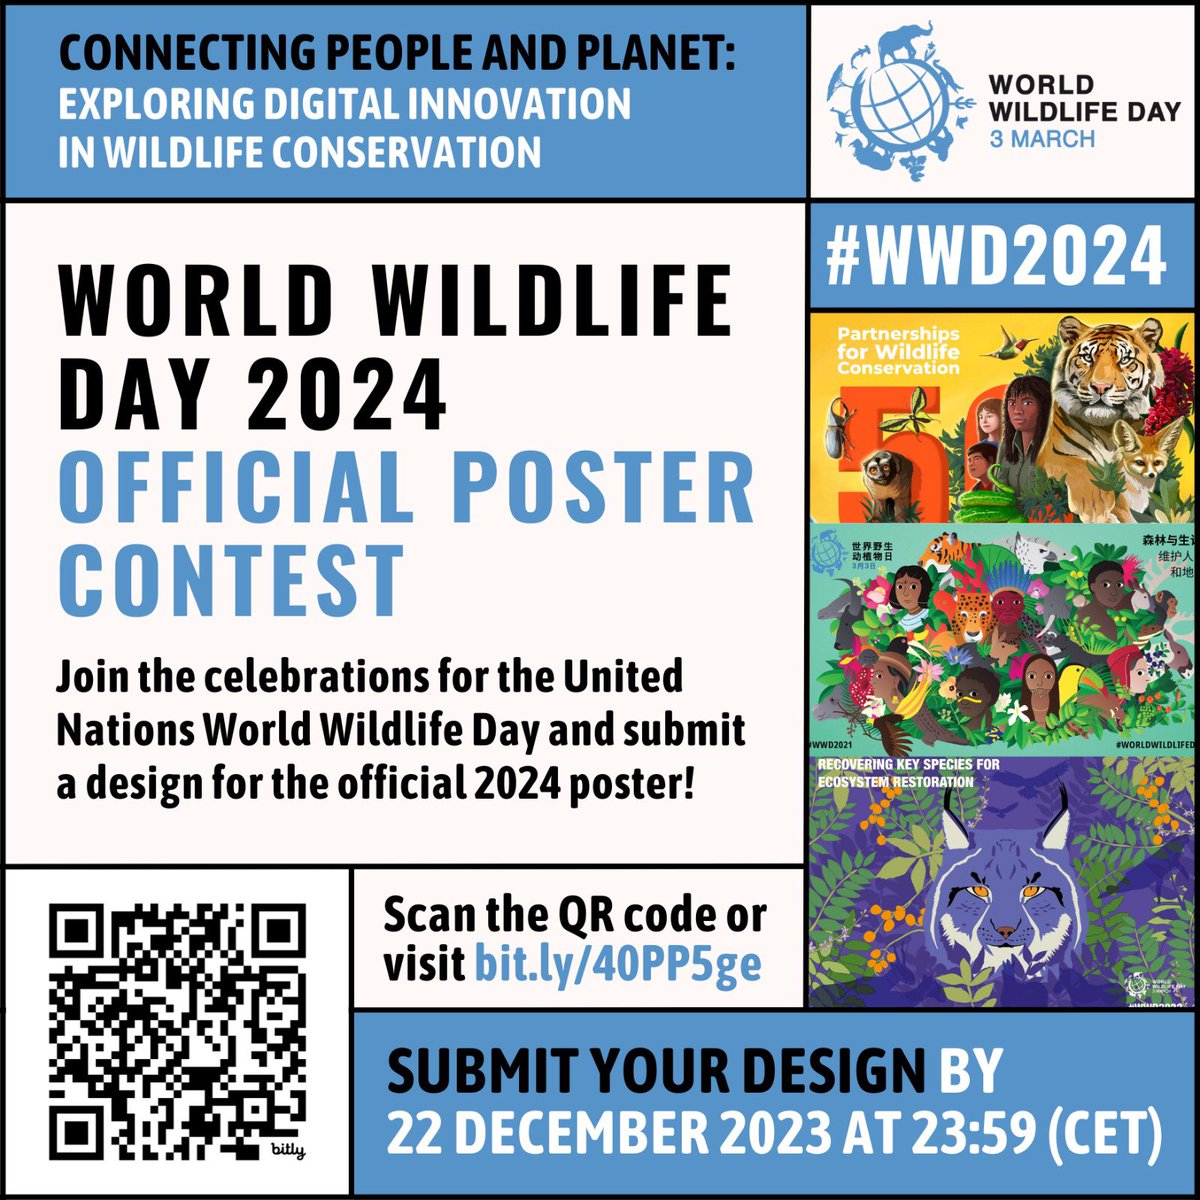 #WWD2024 is 100 days away! 🦁🌴 Are you a graphic designer interested in creating the official poster? Submit your design by 22 Dec. 2023 here 🧑‍🎨 bit.ly/40PP5ge This year’s theme is “Connecting People and Planet: Exploring Digital Innovation in Wildlife Conservation”